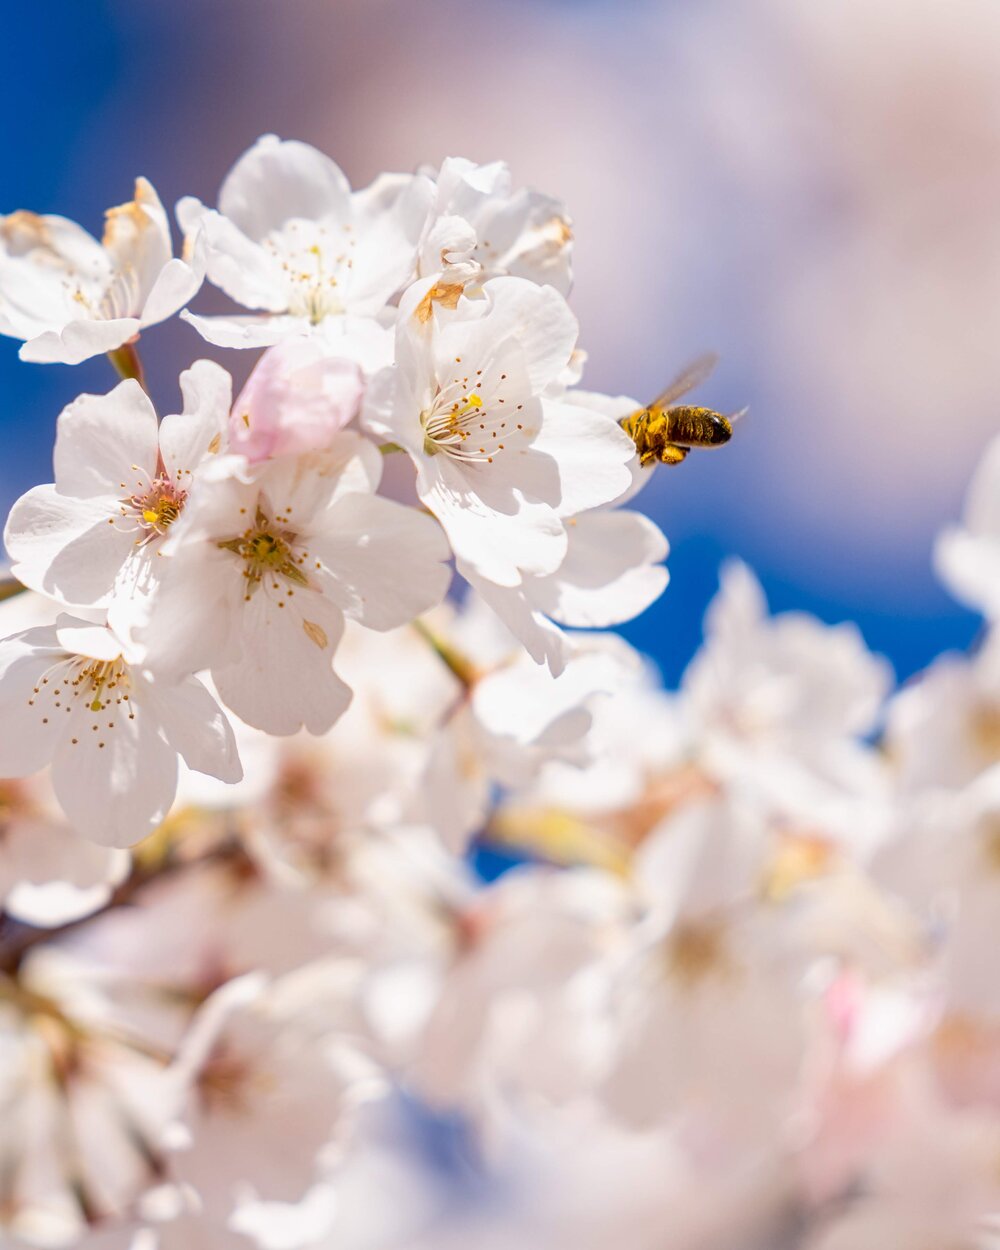 Bees on Cherry Blossoms in Portland, Oregon